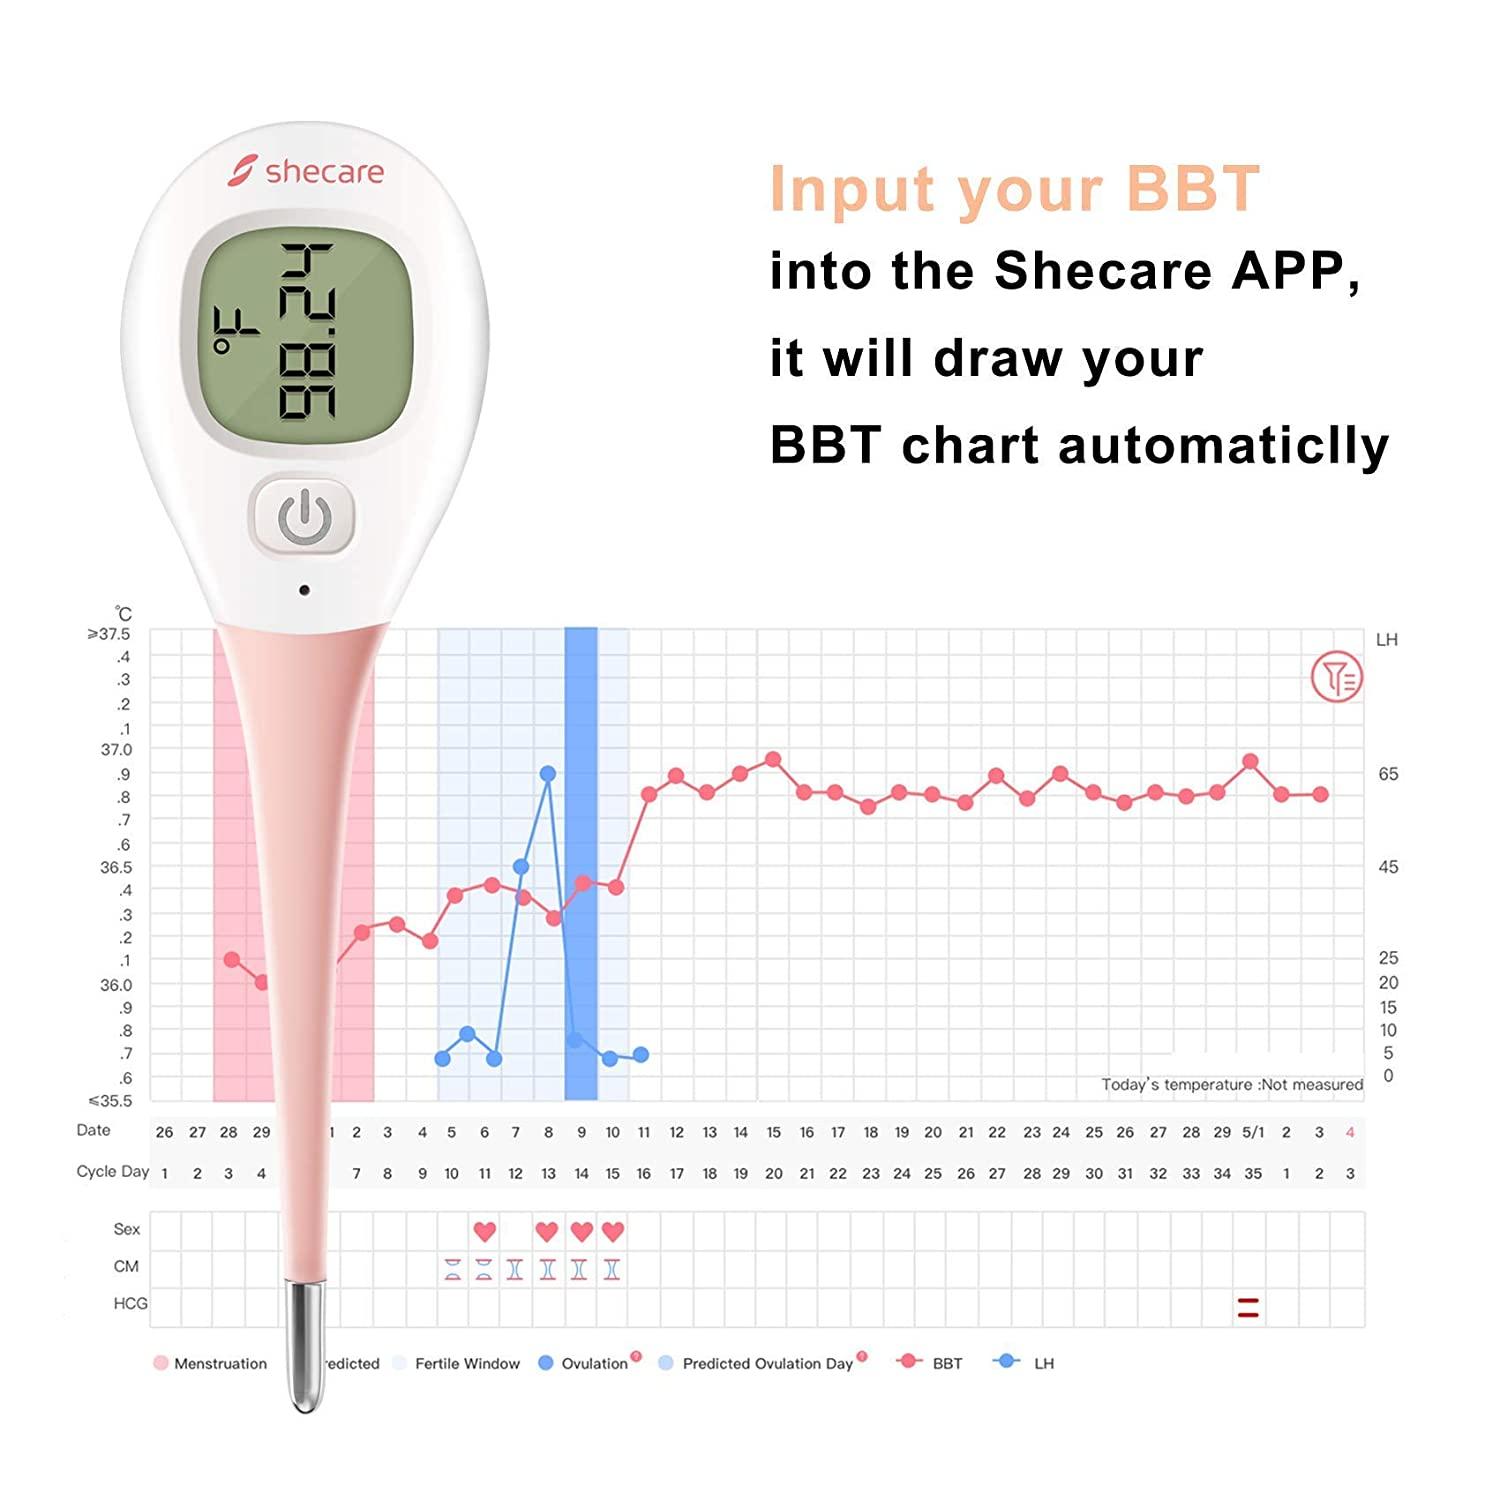 Digital Basal Thermometer, 1 Thermometer